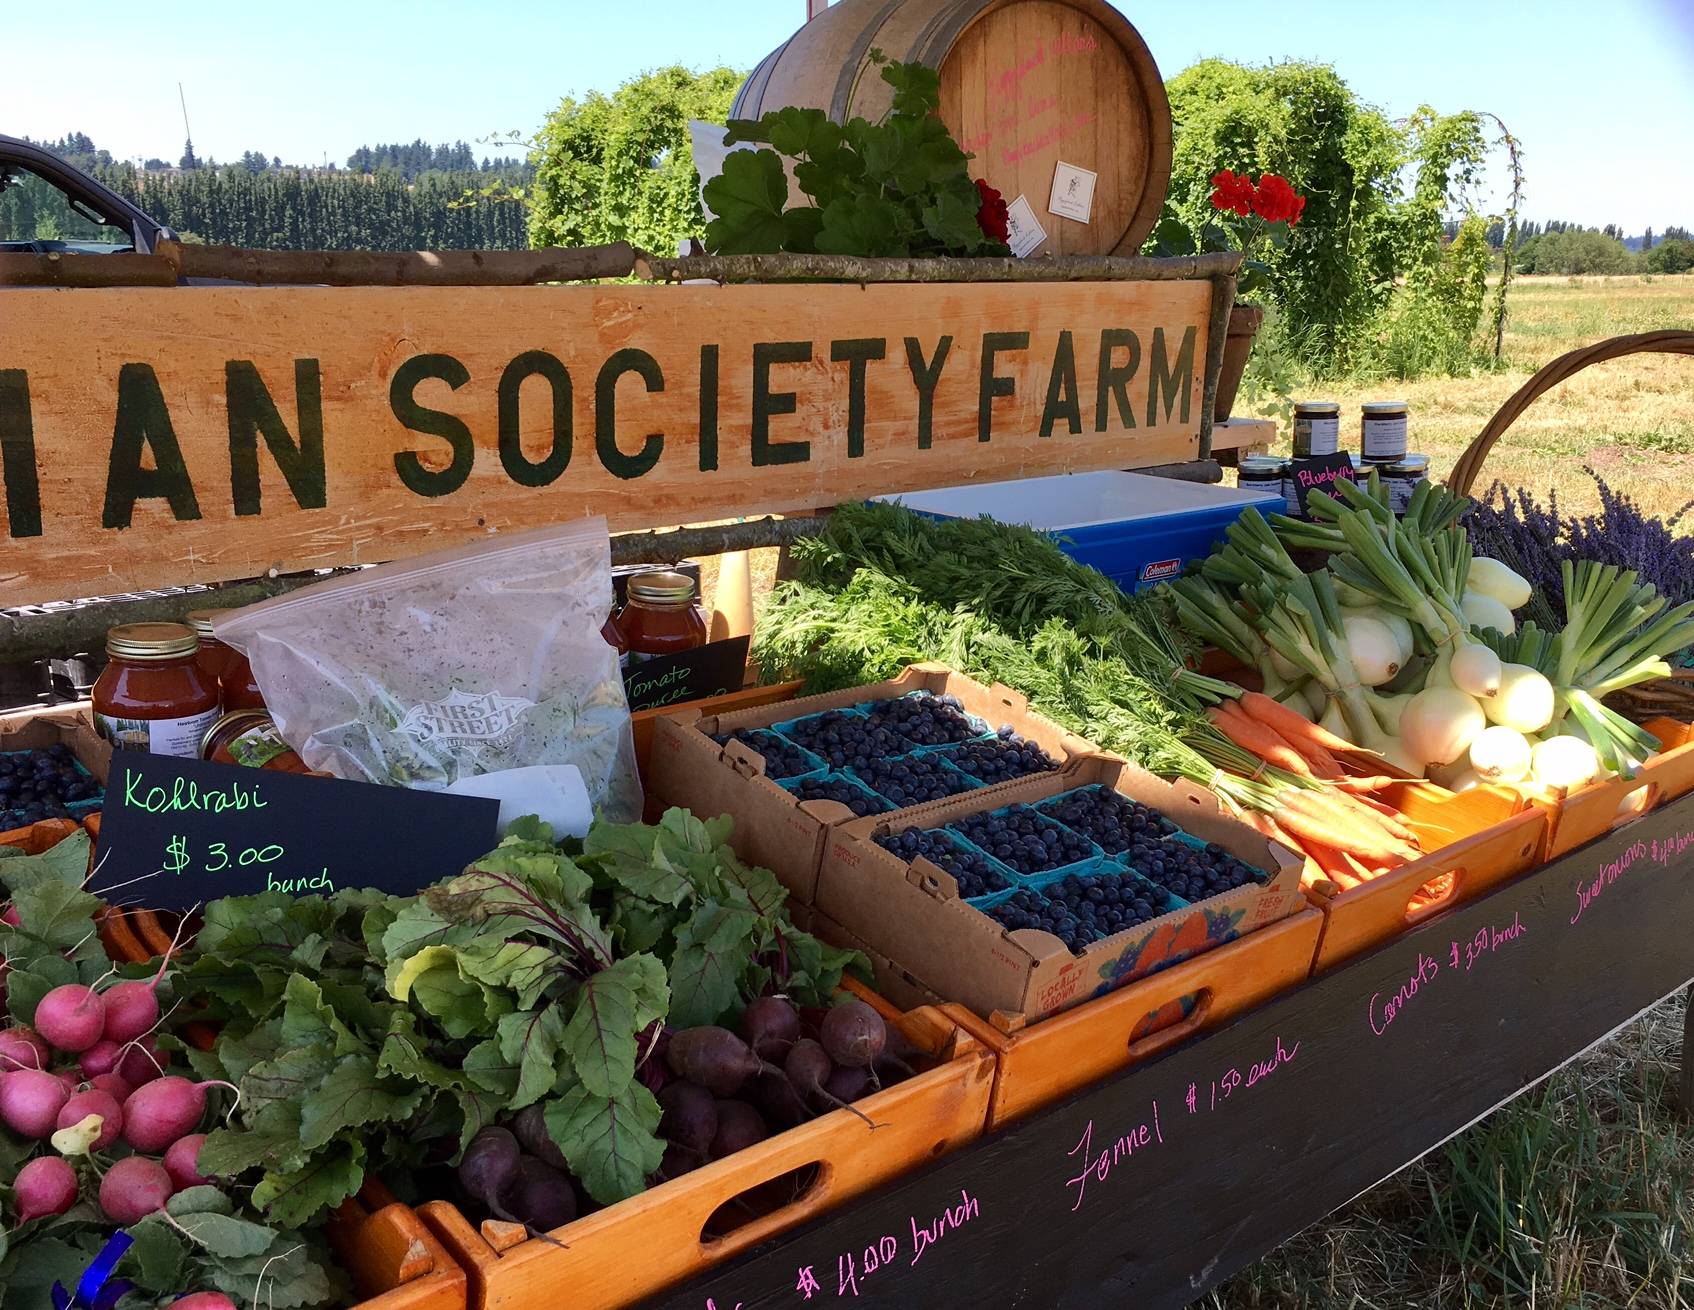 Welcome to the Agrarian Society Farm